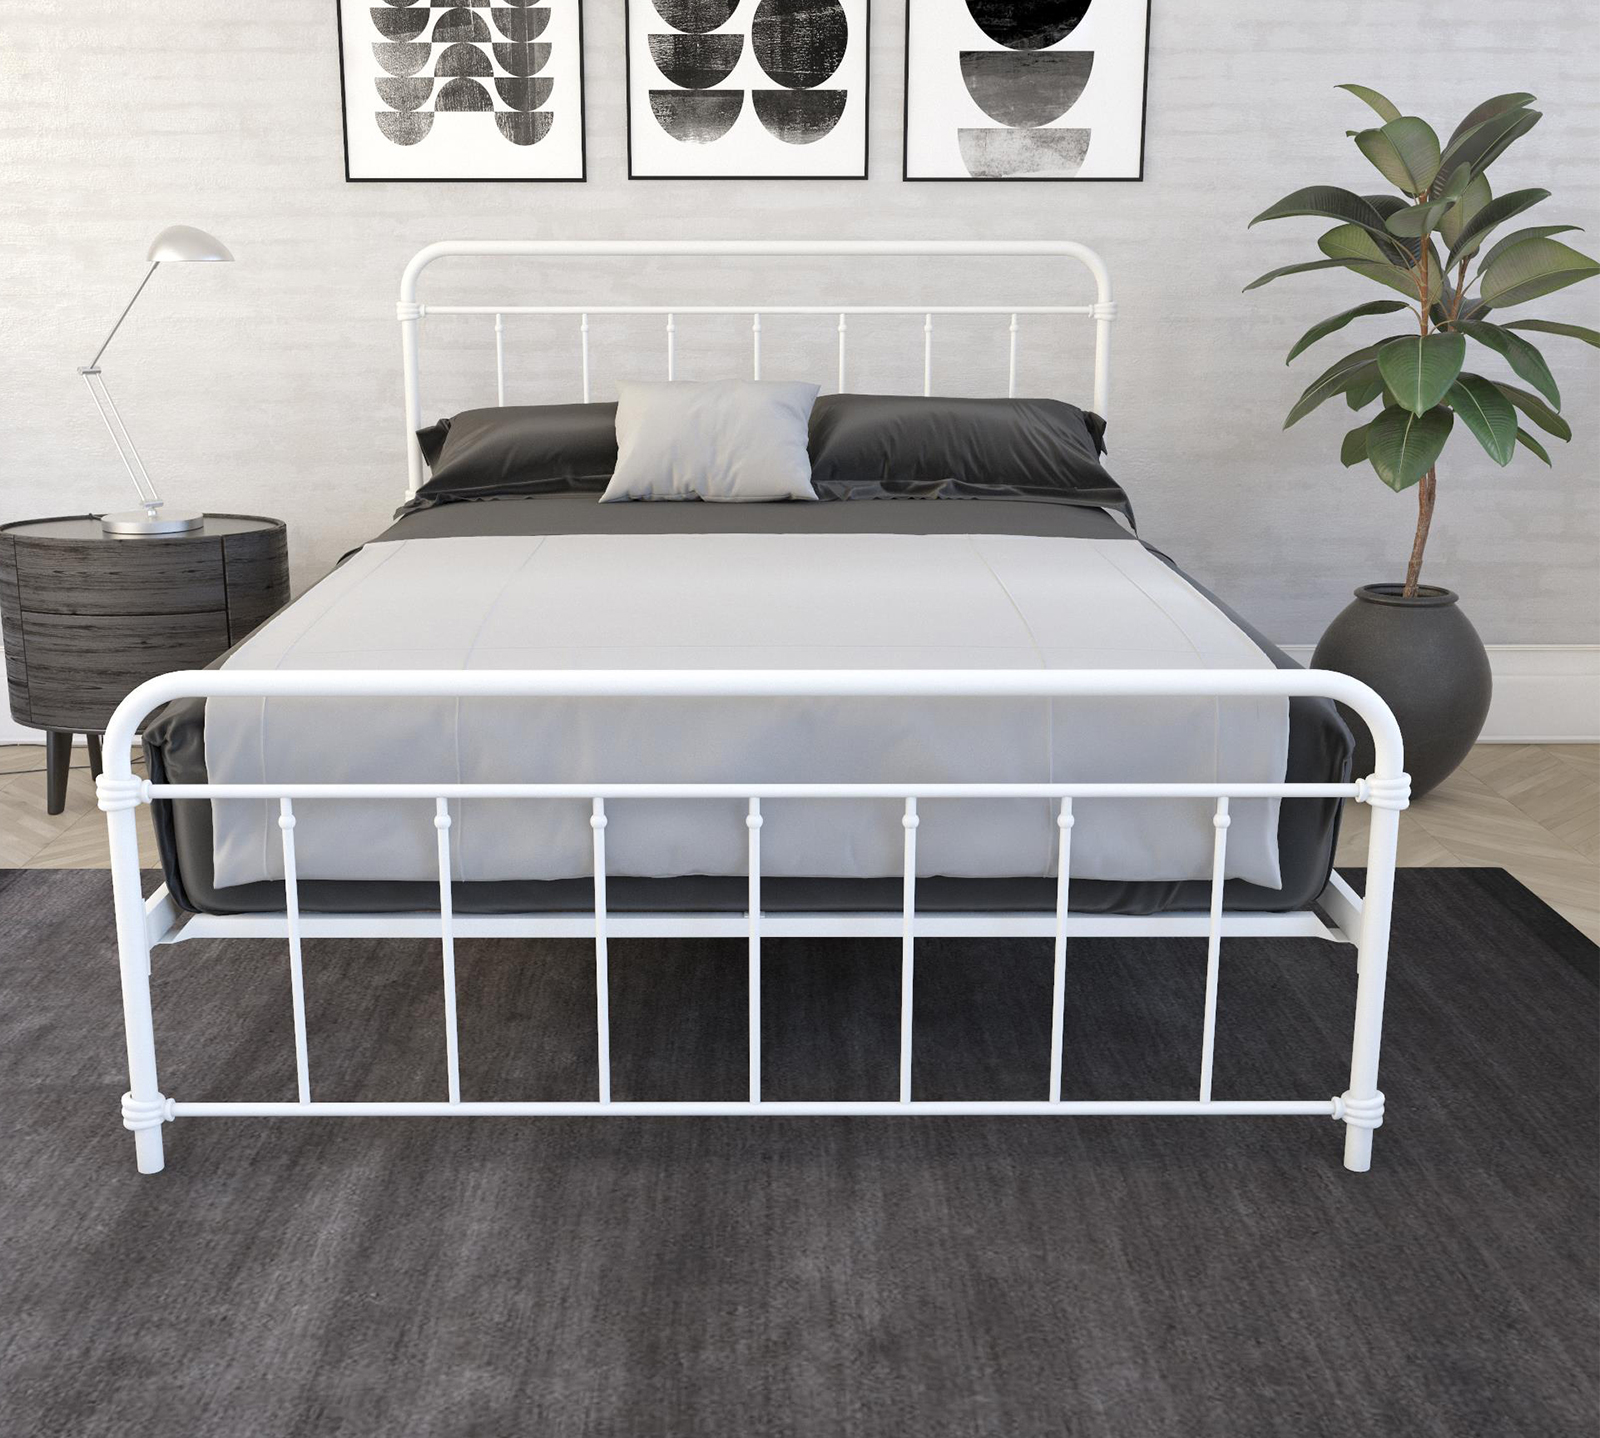 Atwater Living Metal Bed | Queen | White | Wyn